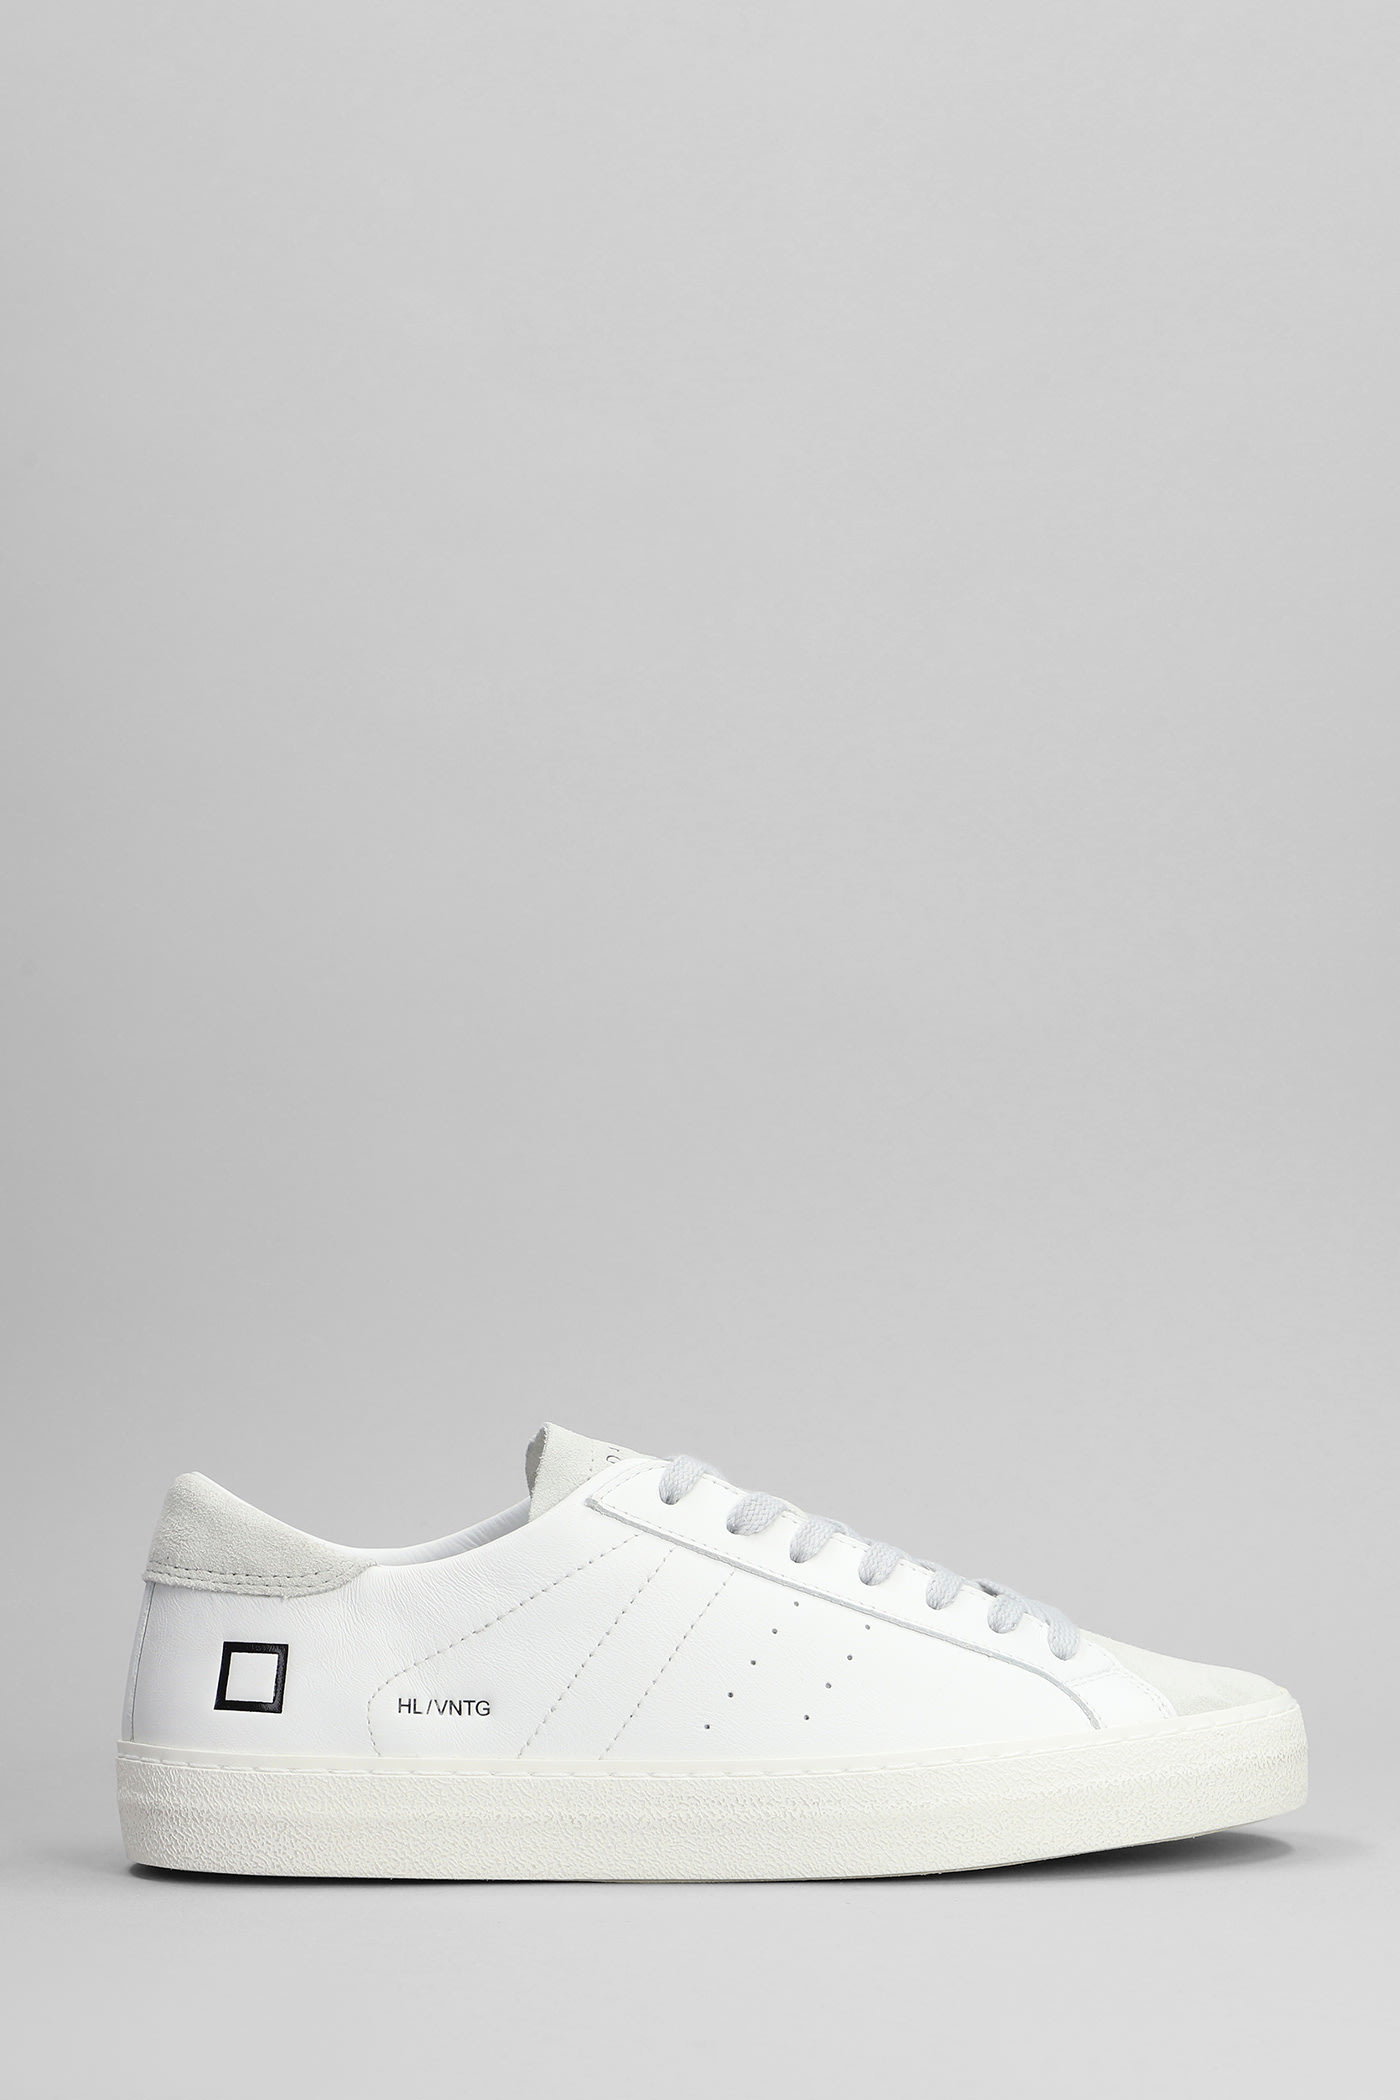 Shop Date Hill Low Sneakers In White Suede And Leather